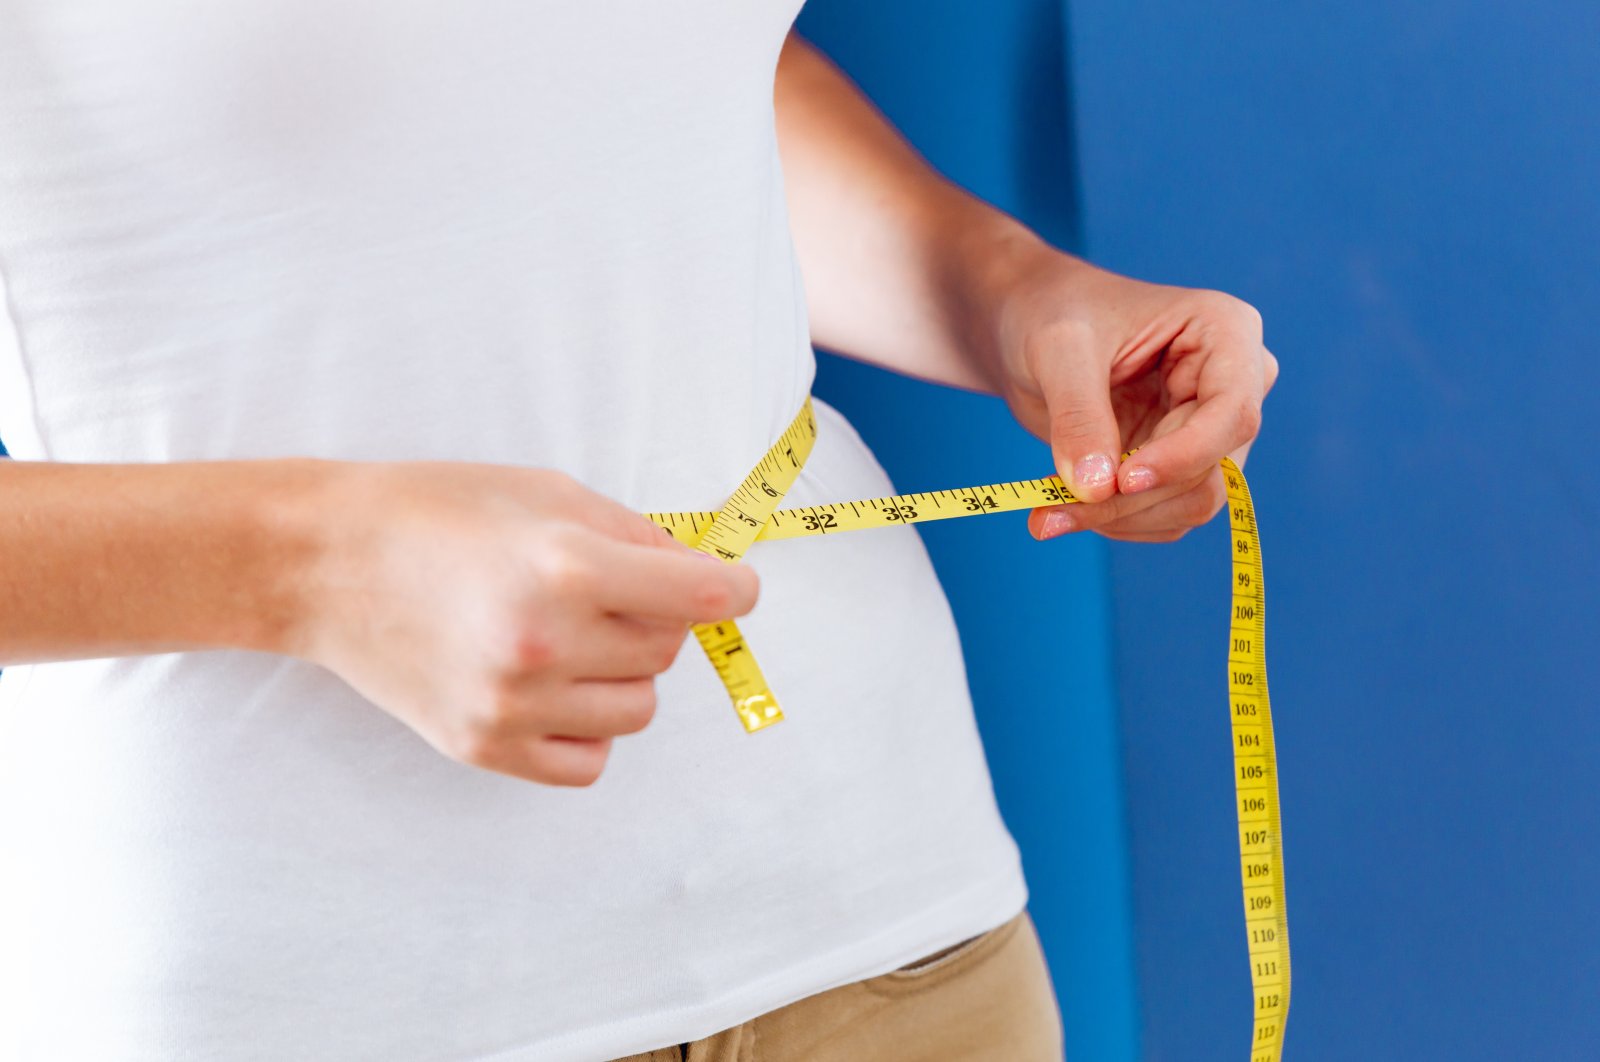 Obesity is defined as increased abnormal fat accumulation that endangers human health in the short and long term. (Shutterstock Photo)